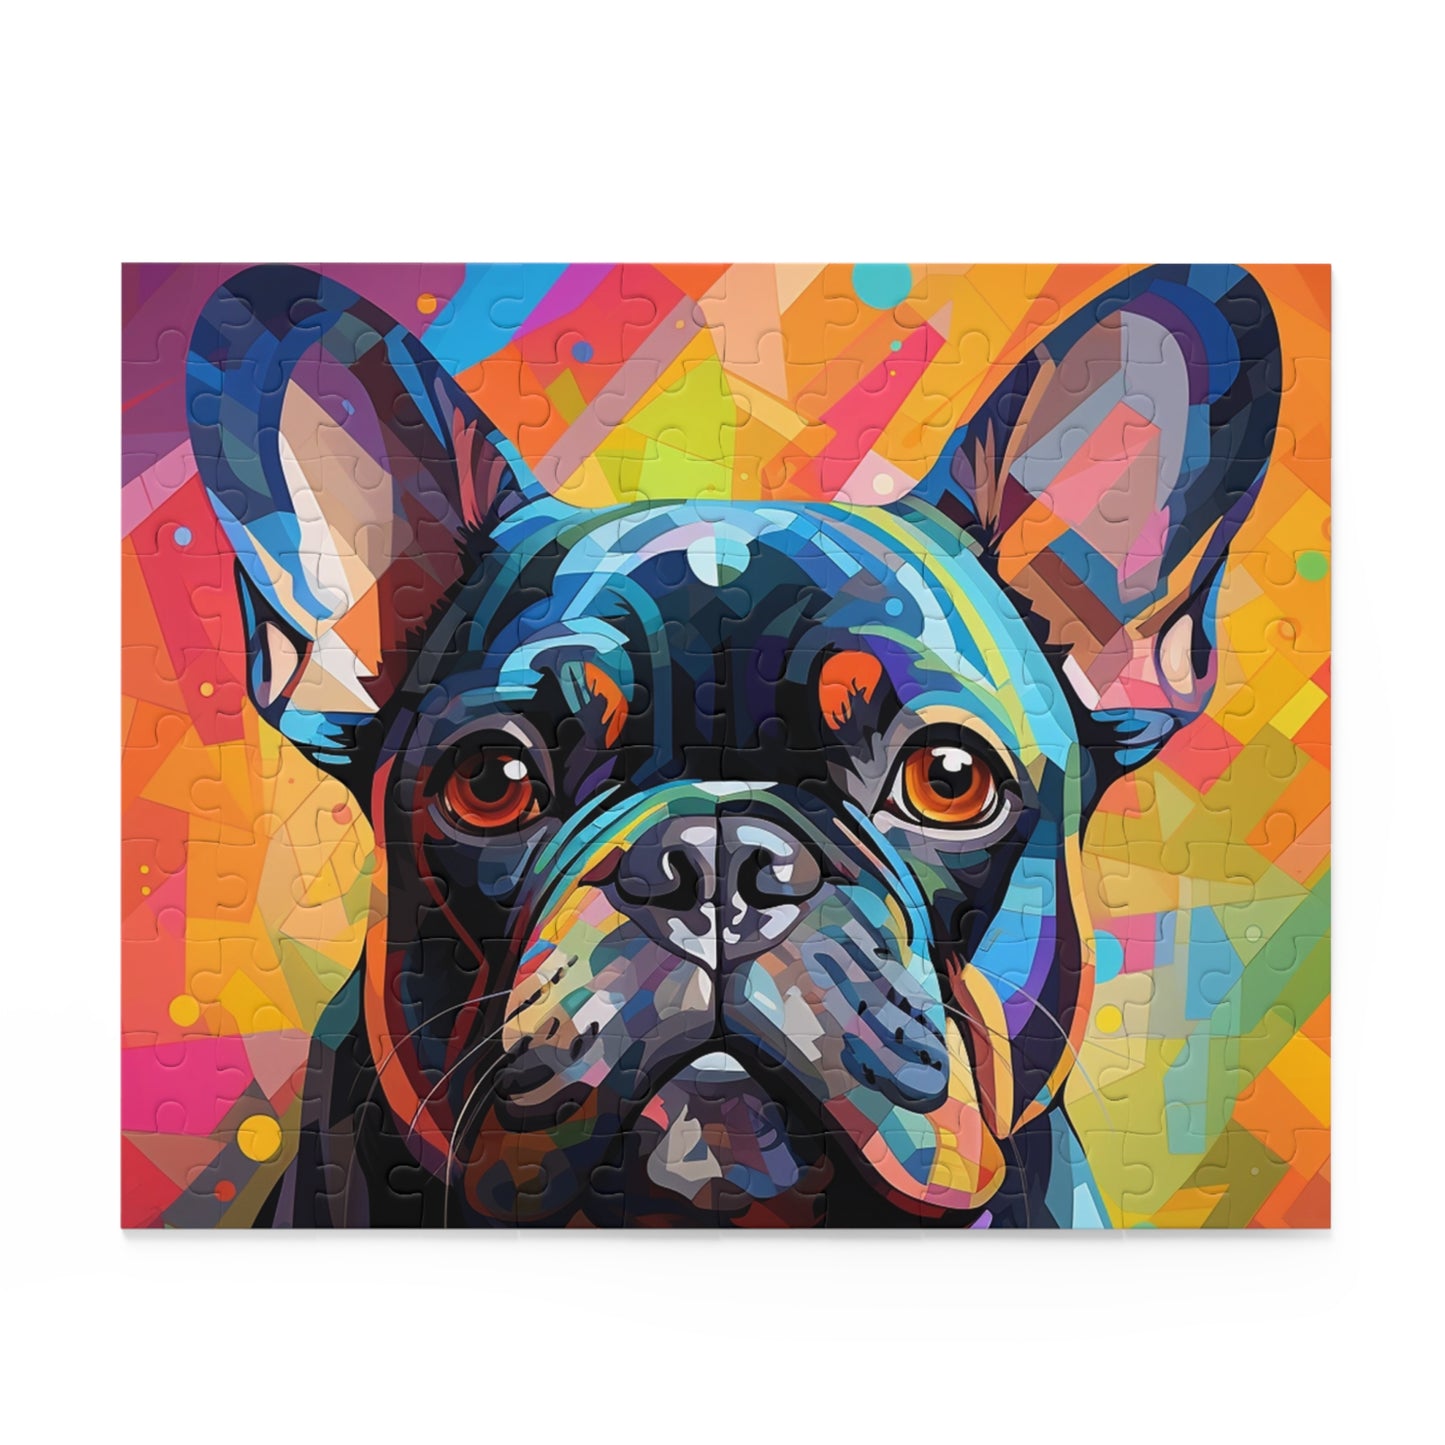 Abstract Frenchie Oil Paint Dog Jigsaw Puzzle Adult Birthday Business Jigsaw Puzzle Gift for Him Funny Humorous Indoor Outdoor Game Gift For Her Online-2